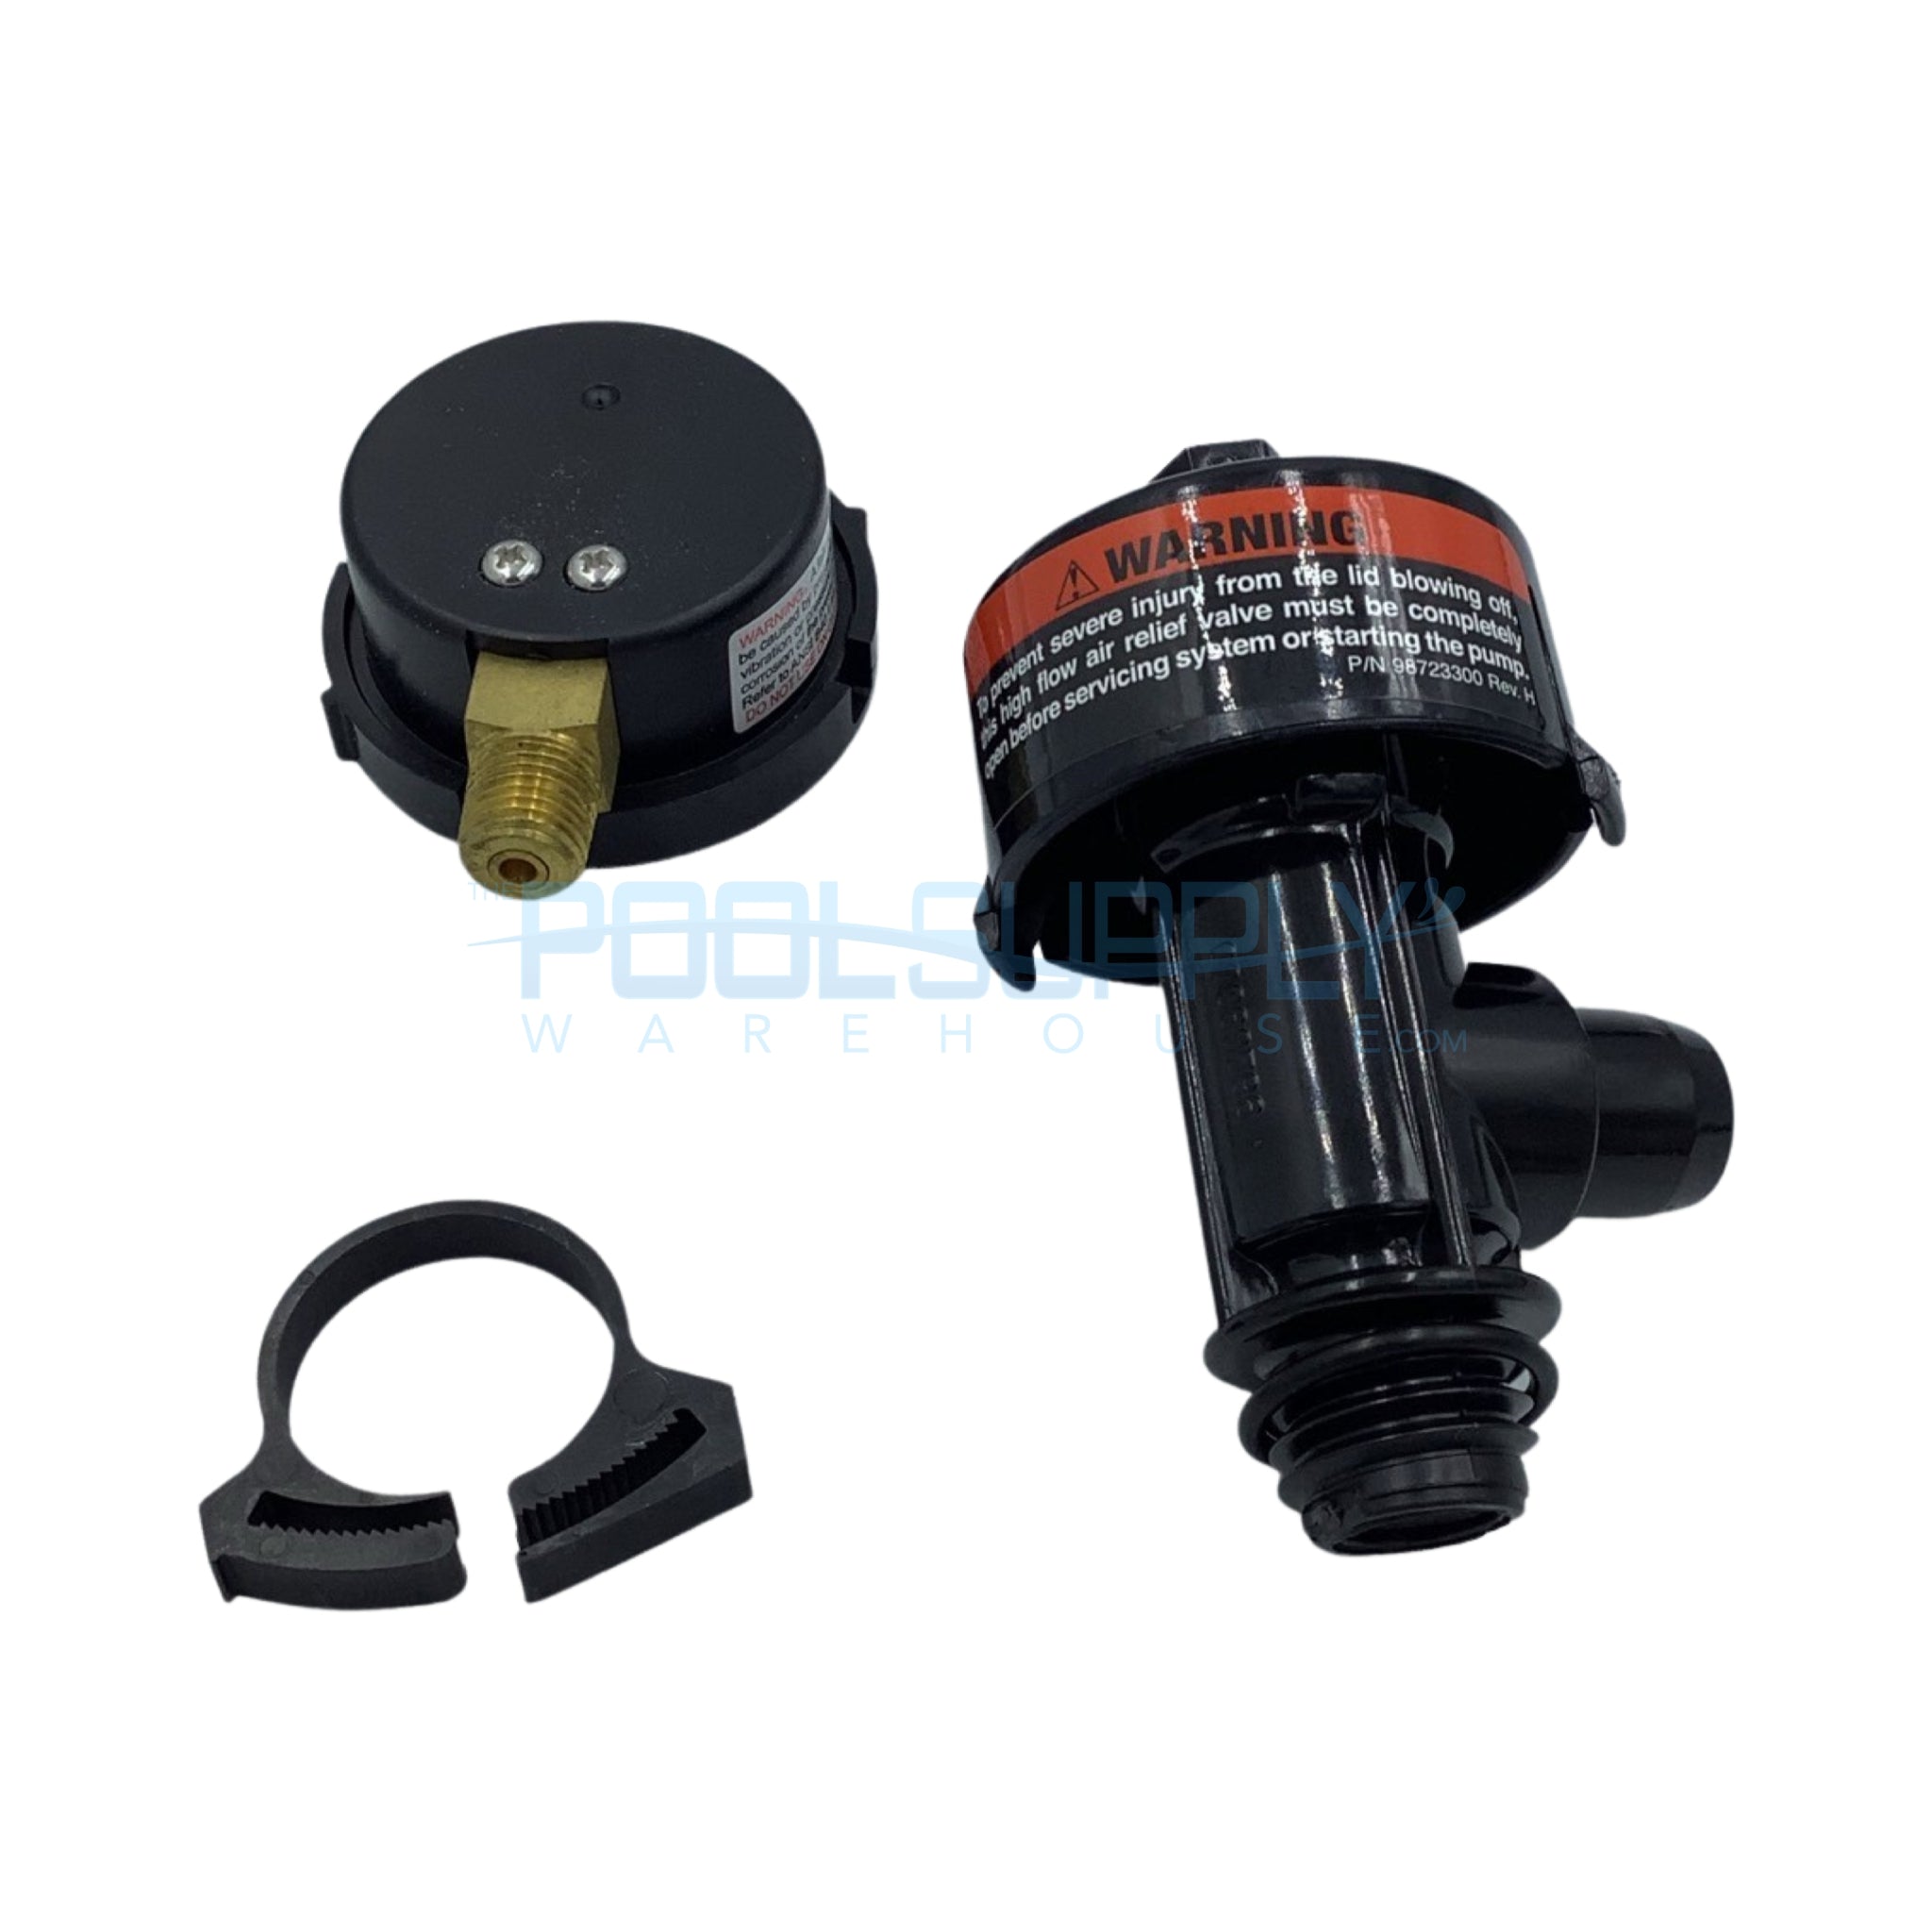 Pentair Filter Manual Air Relief Valve Assembly - 98209800 - The Pool Supply Warehouse